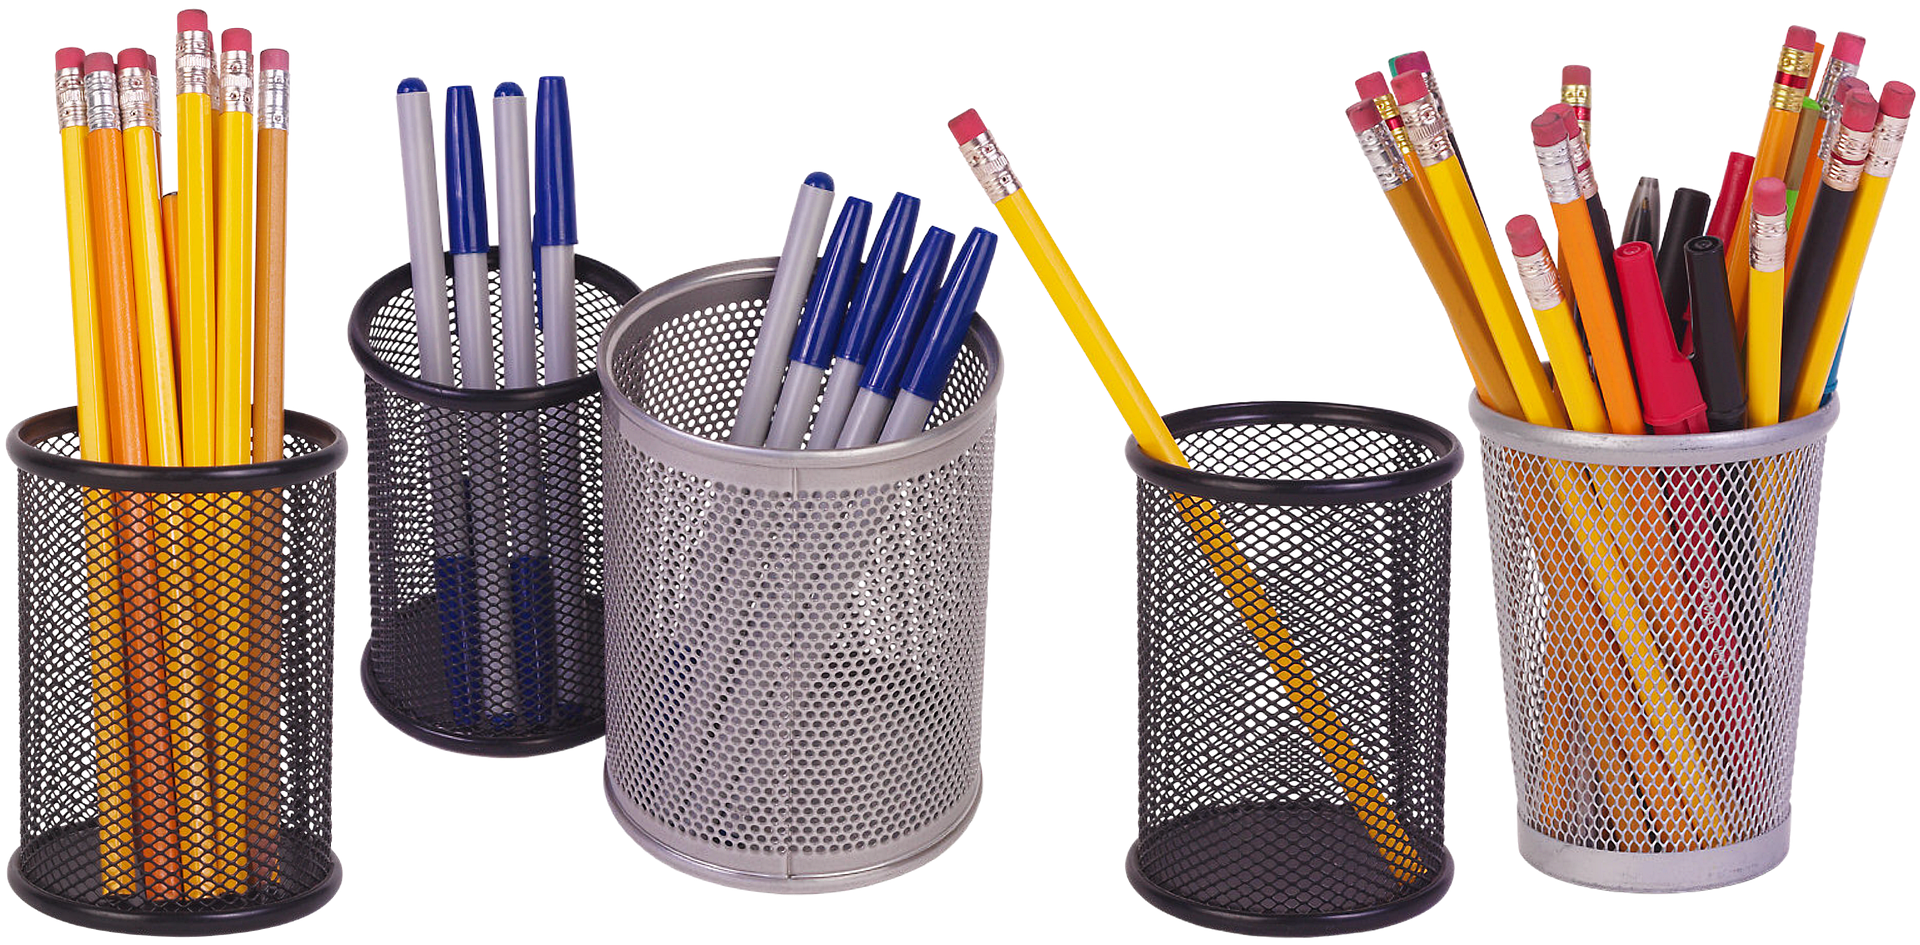 Rating of the best stationery organizers for 2022